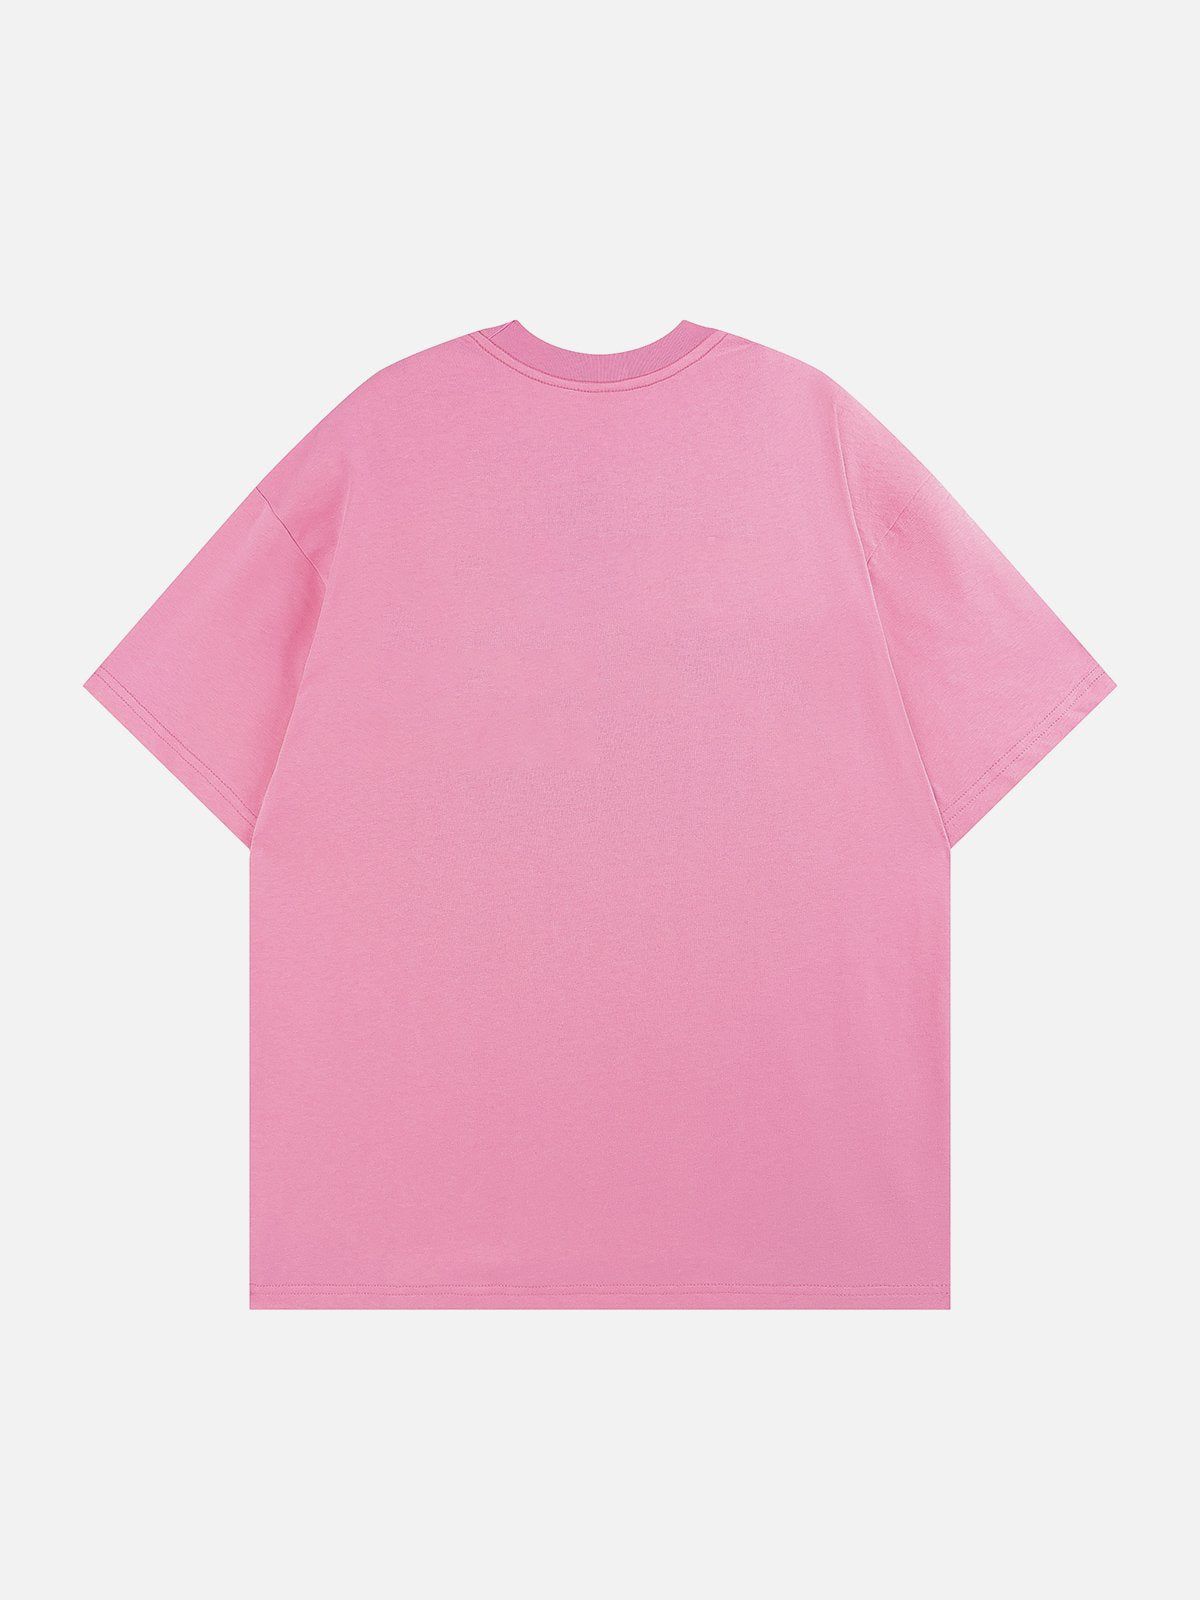 Sneakerland™ - Letter Printing Solid Color Tee